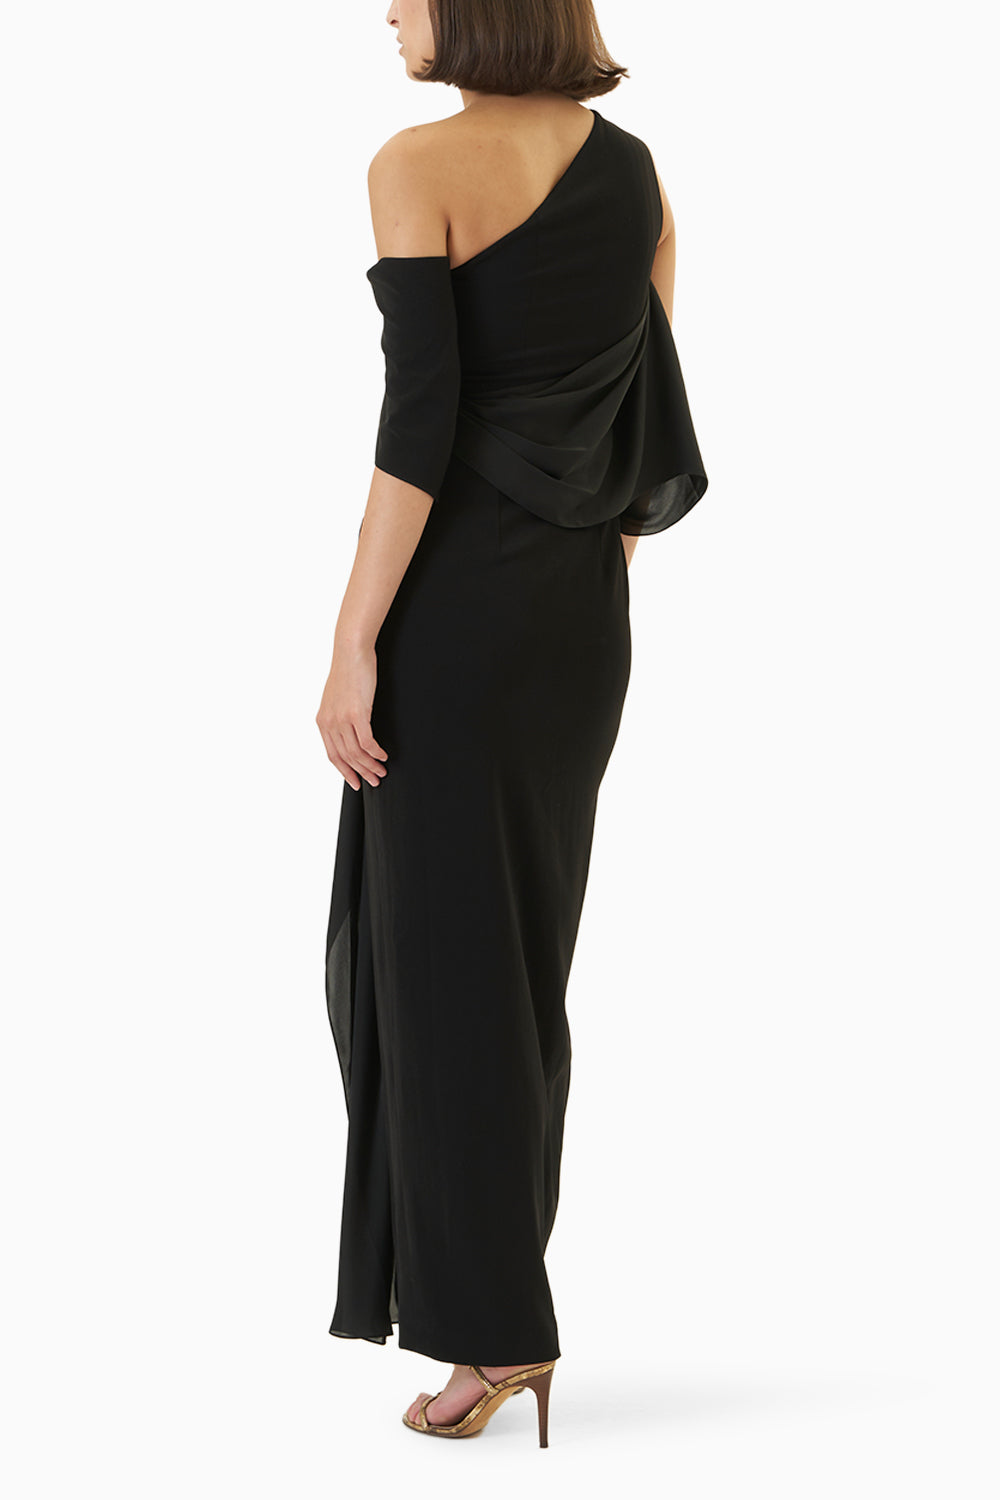 Noir One Cold Shoulder Fitted Gown